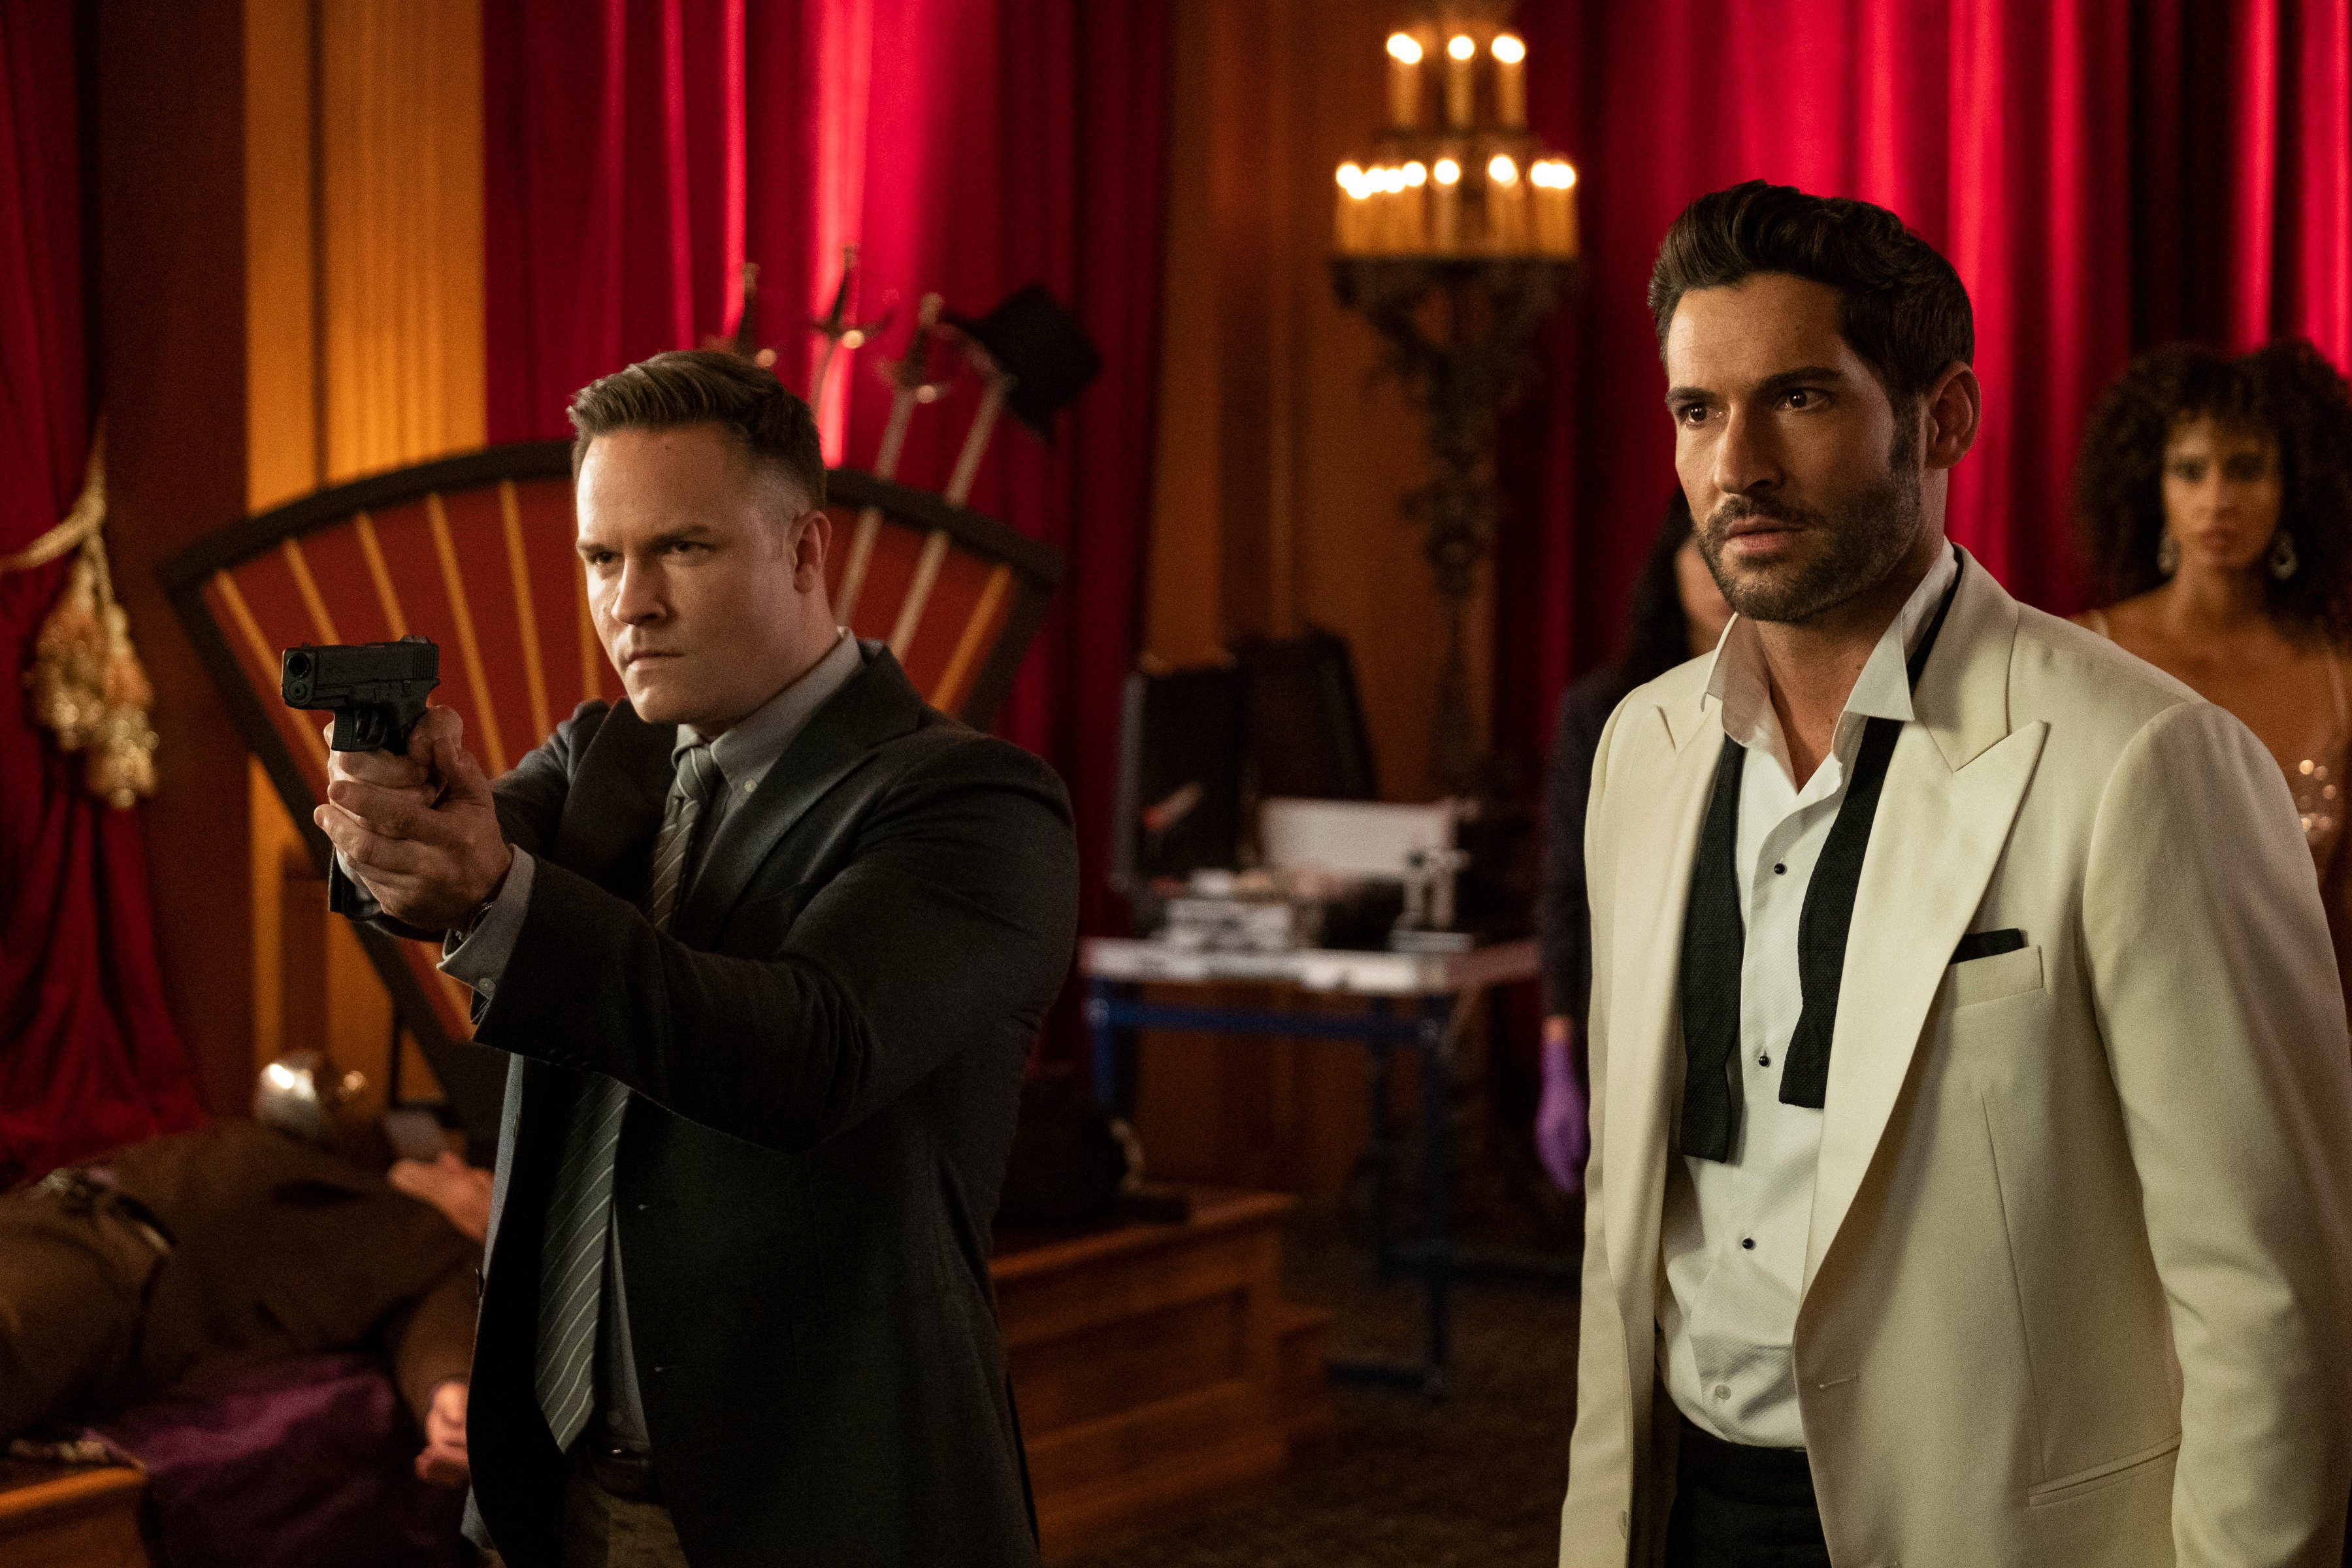 WATCH: ‘Lucifer’ releases first teaser for season 6